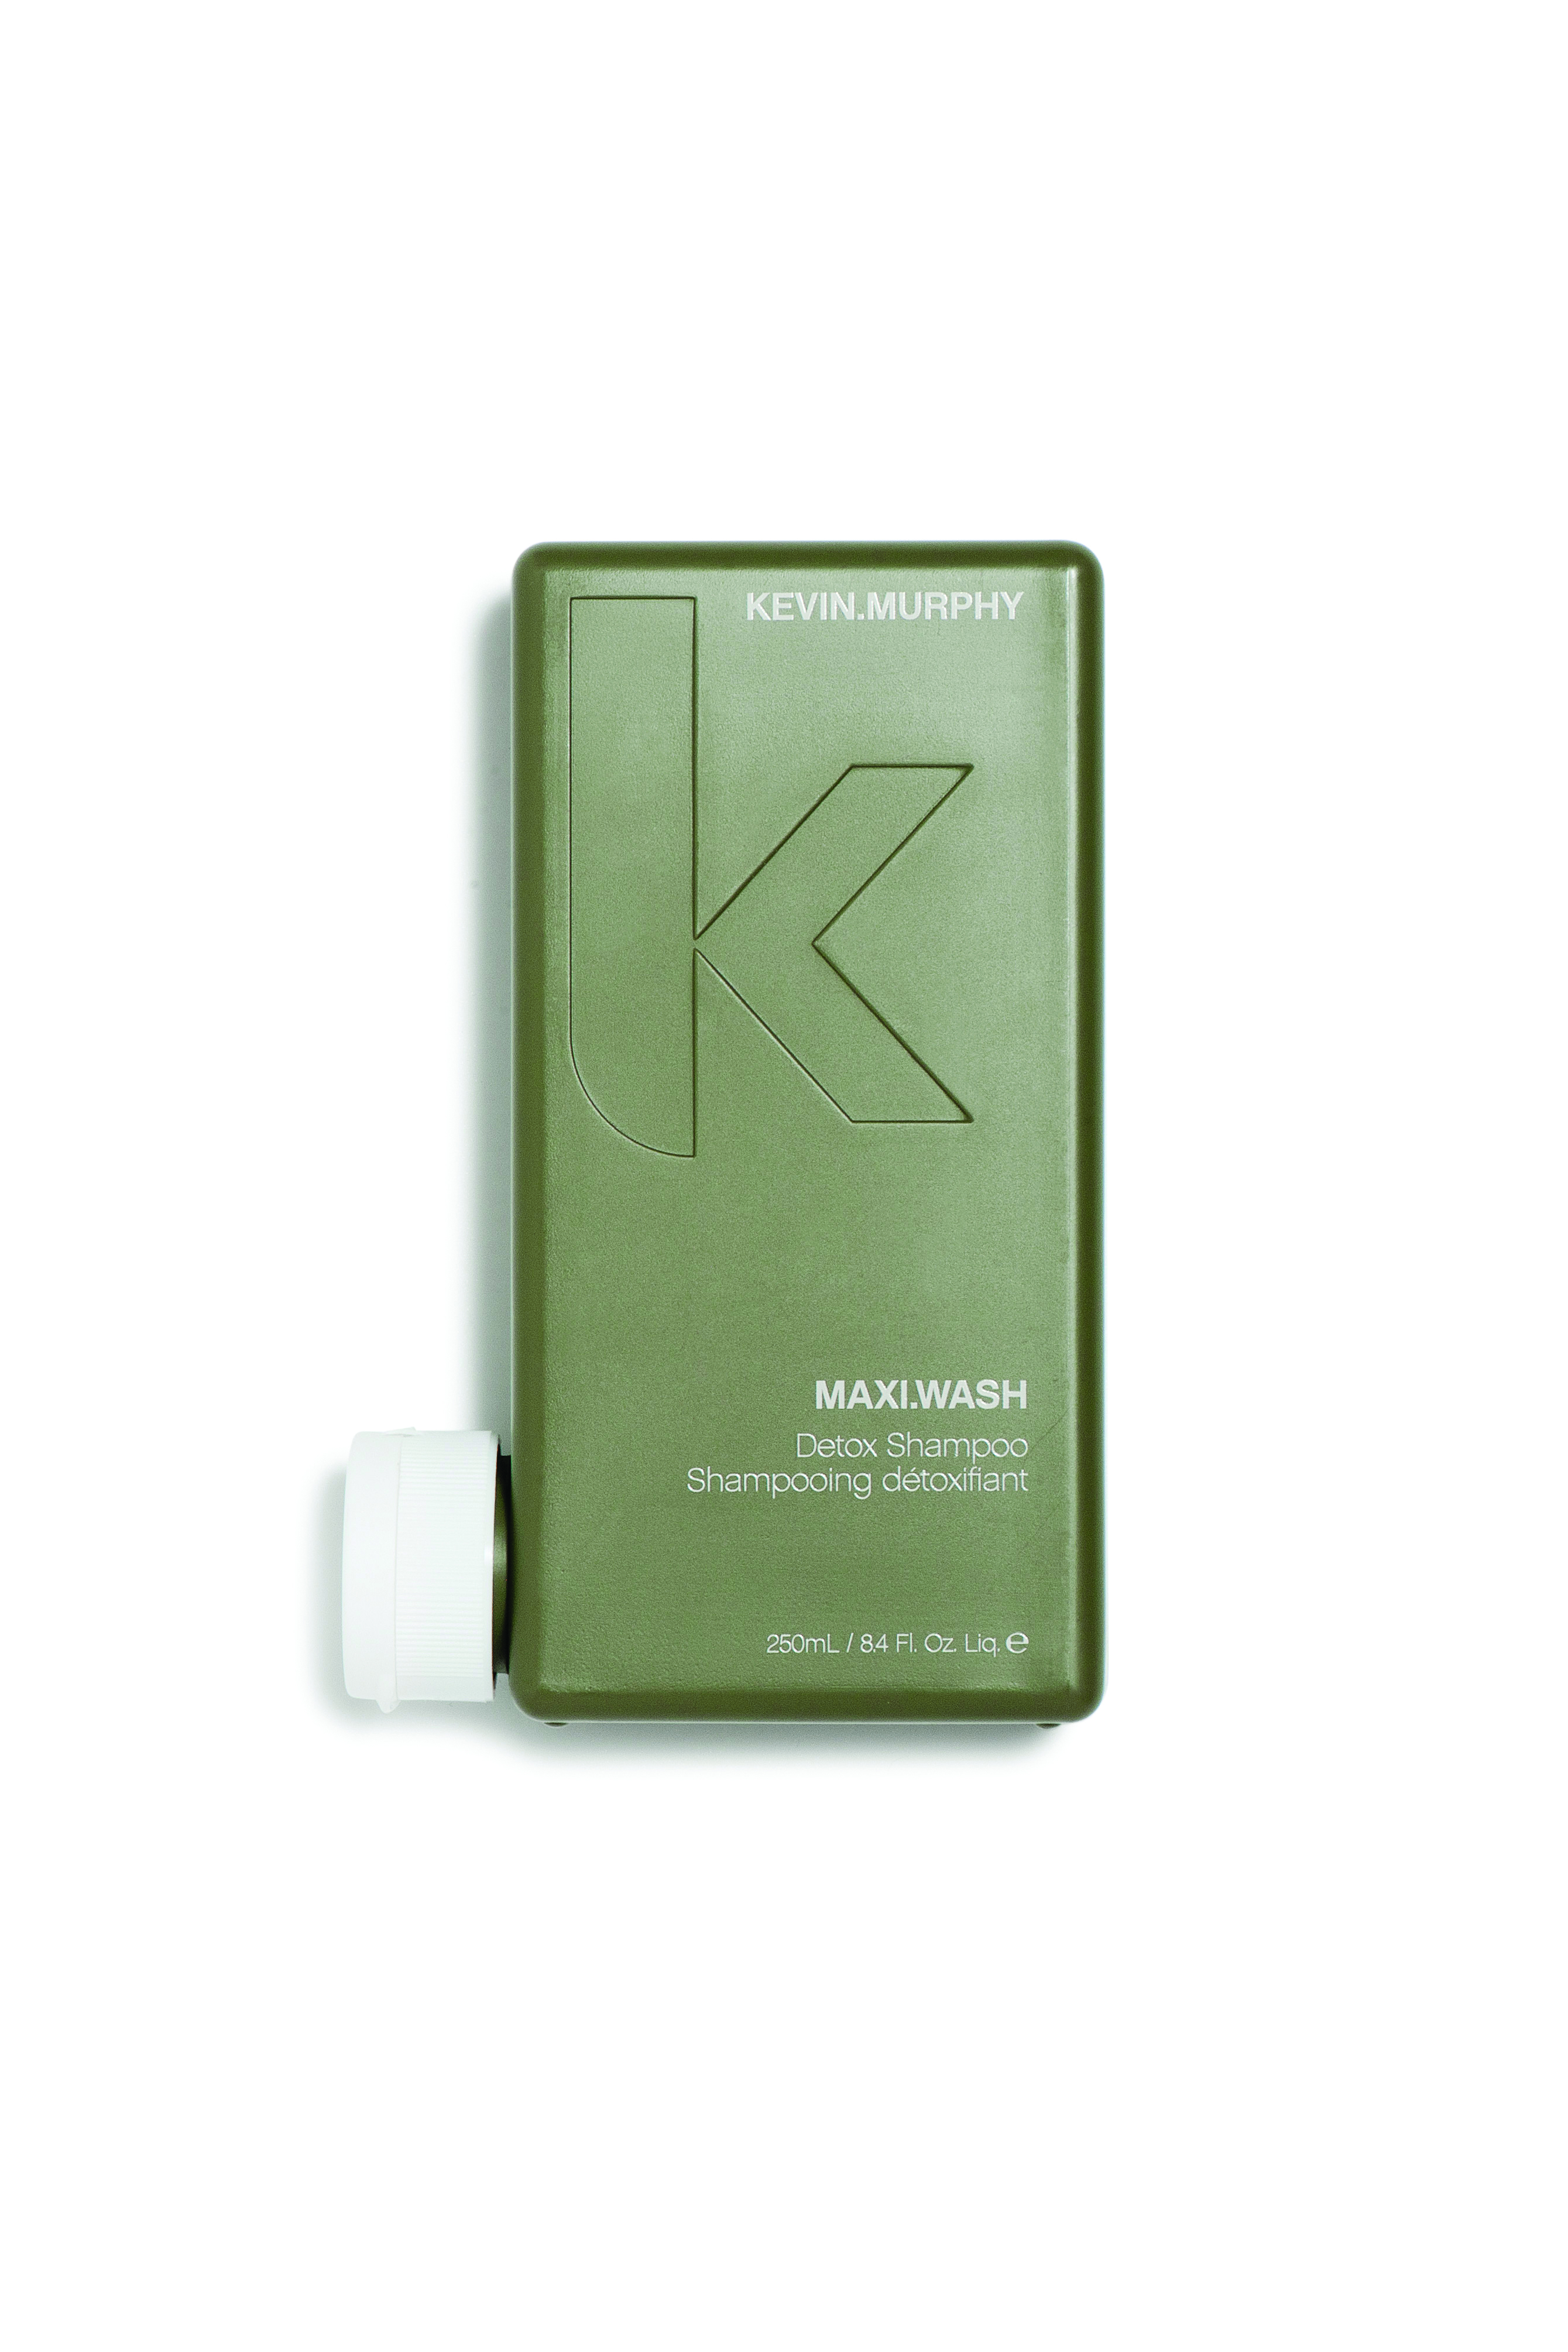 Kevin Murphy Maxi Wash available Confidente Kevin